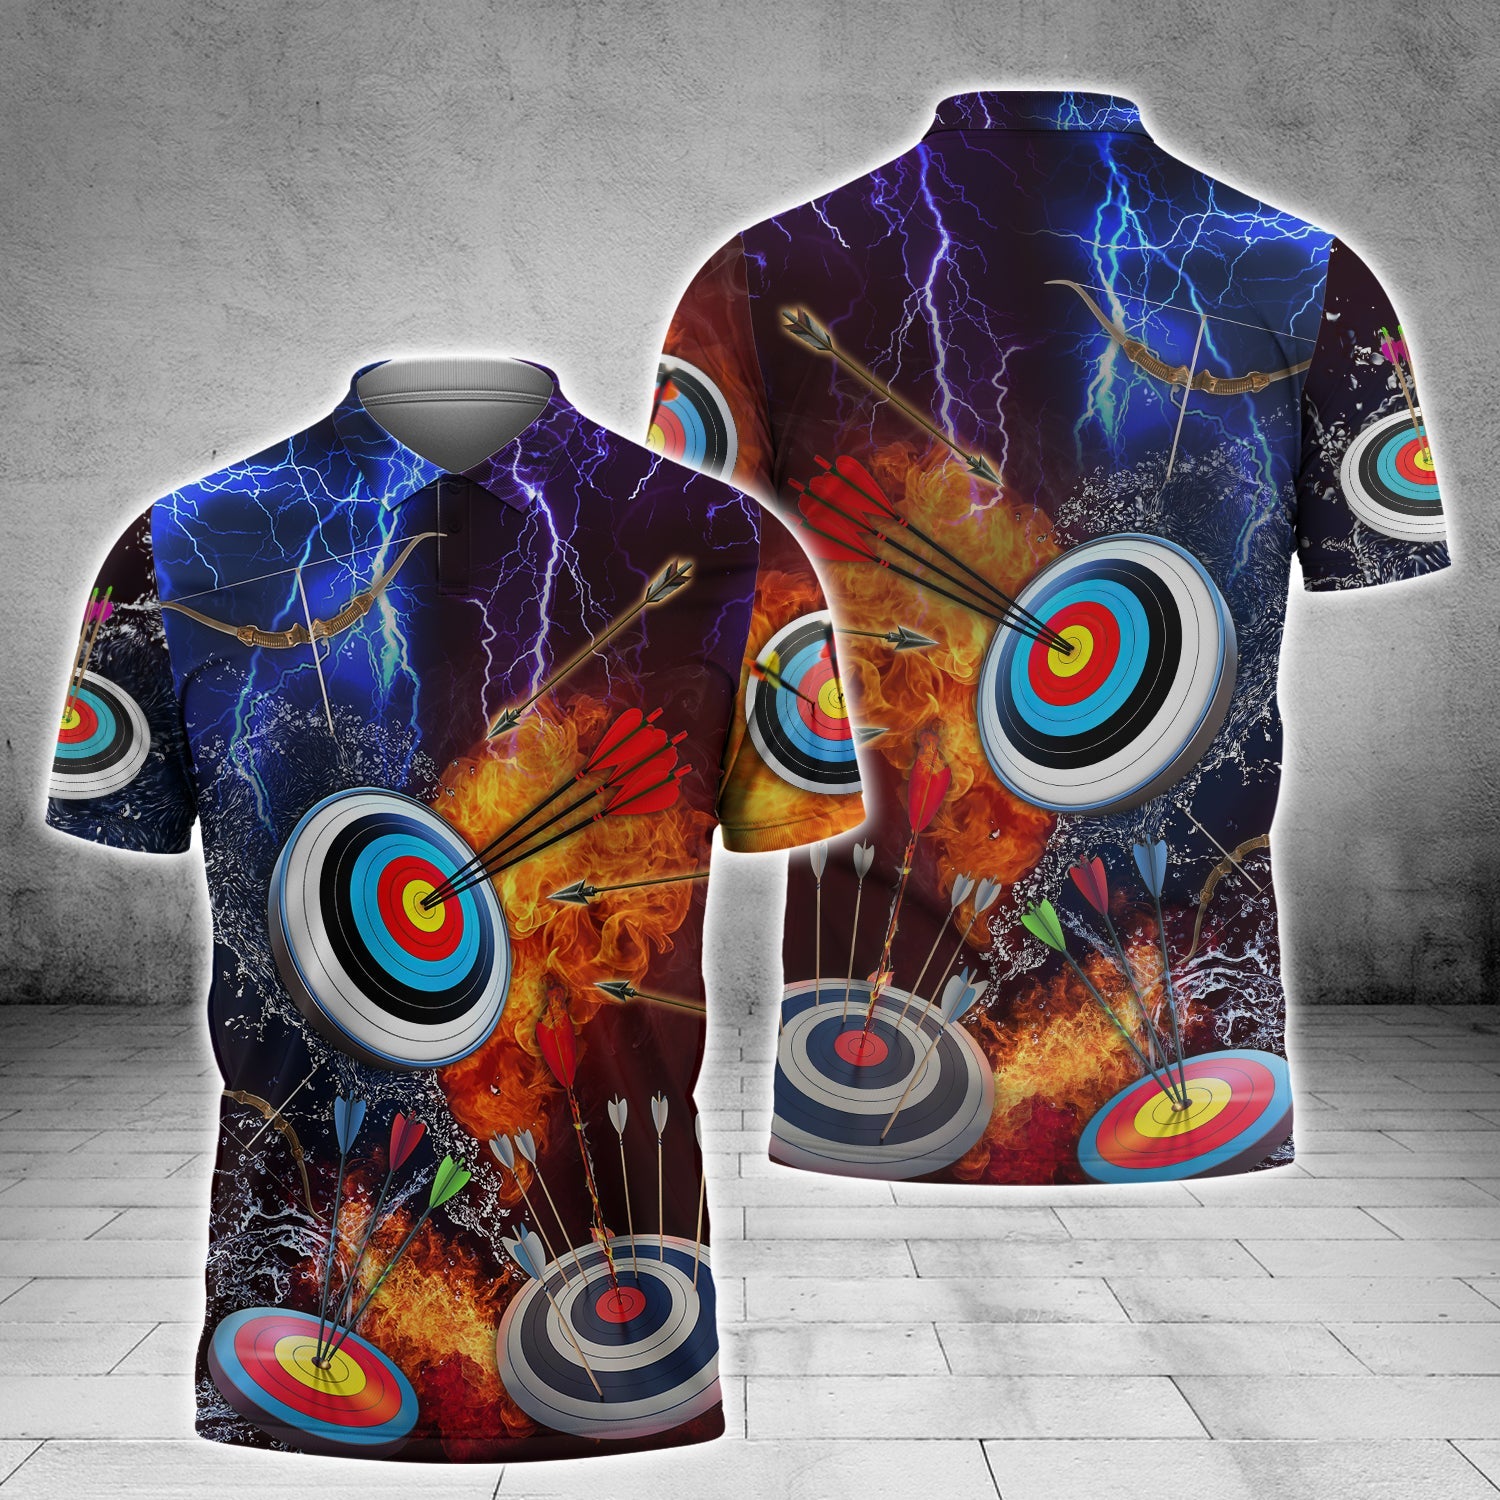 3D All Over Print Archery Water and Fire Pattern Polo Shirt/ Perfect Shirt for Men Women/ Archery Team Shirt